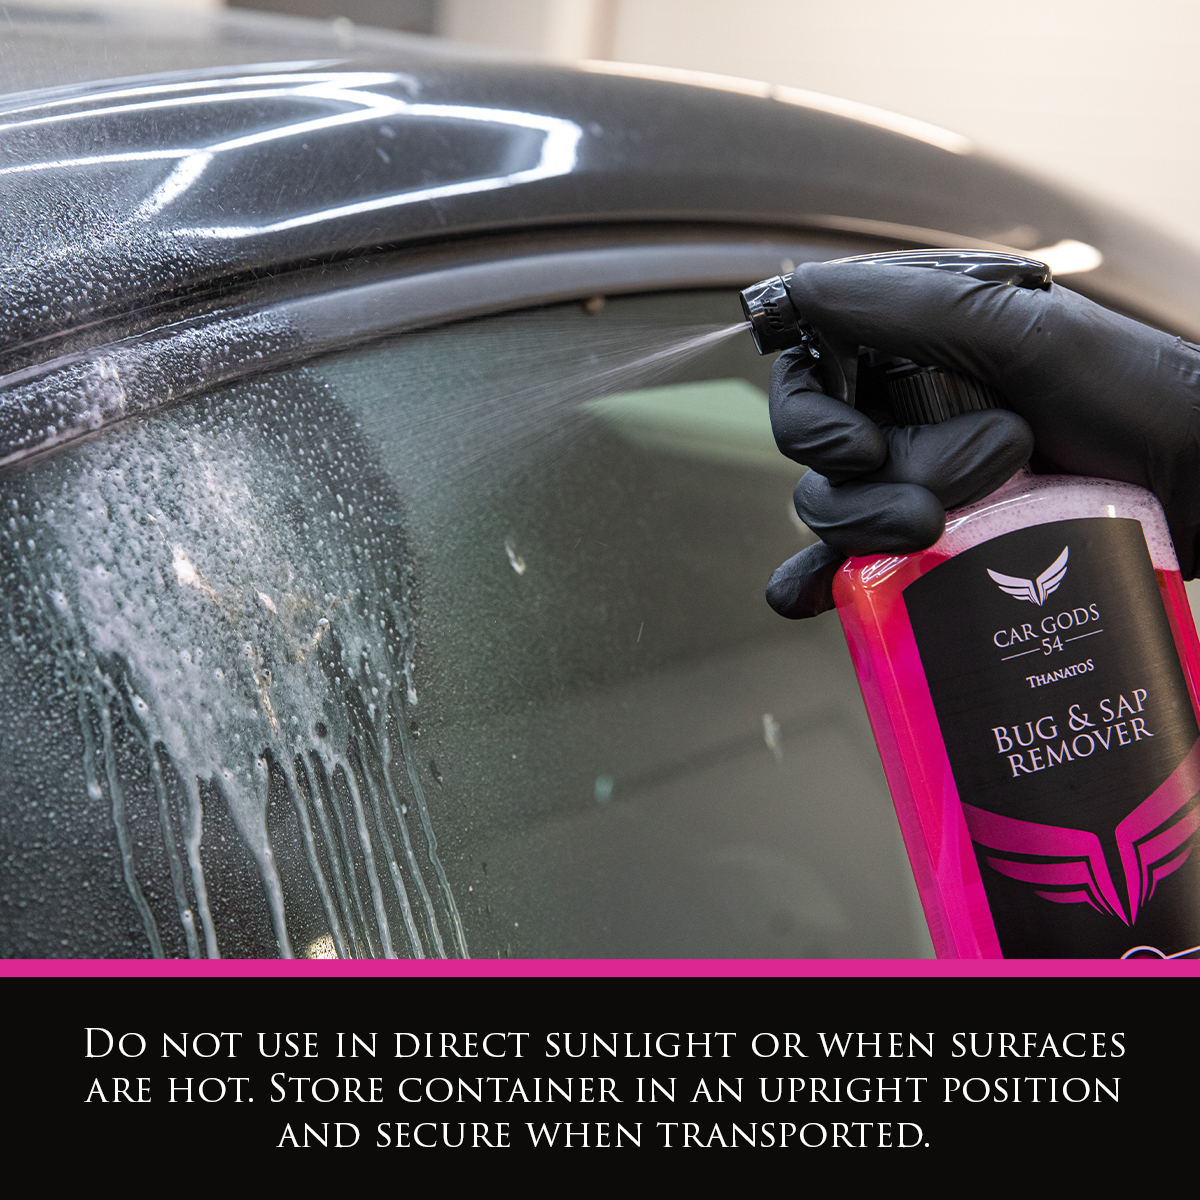 Image shows bottle of Car Gods Bug & Sap Remover being sprayed onto the roof of a car. Text: Do not use in direct sunlight or when surfaces are hot. Store container in an upright position and secure when transported.